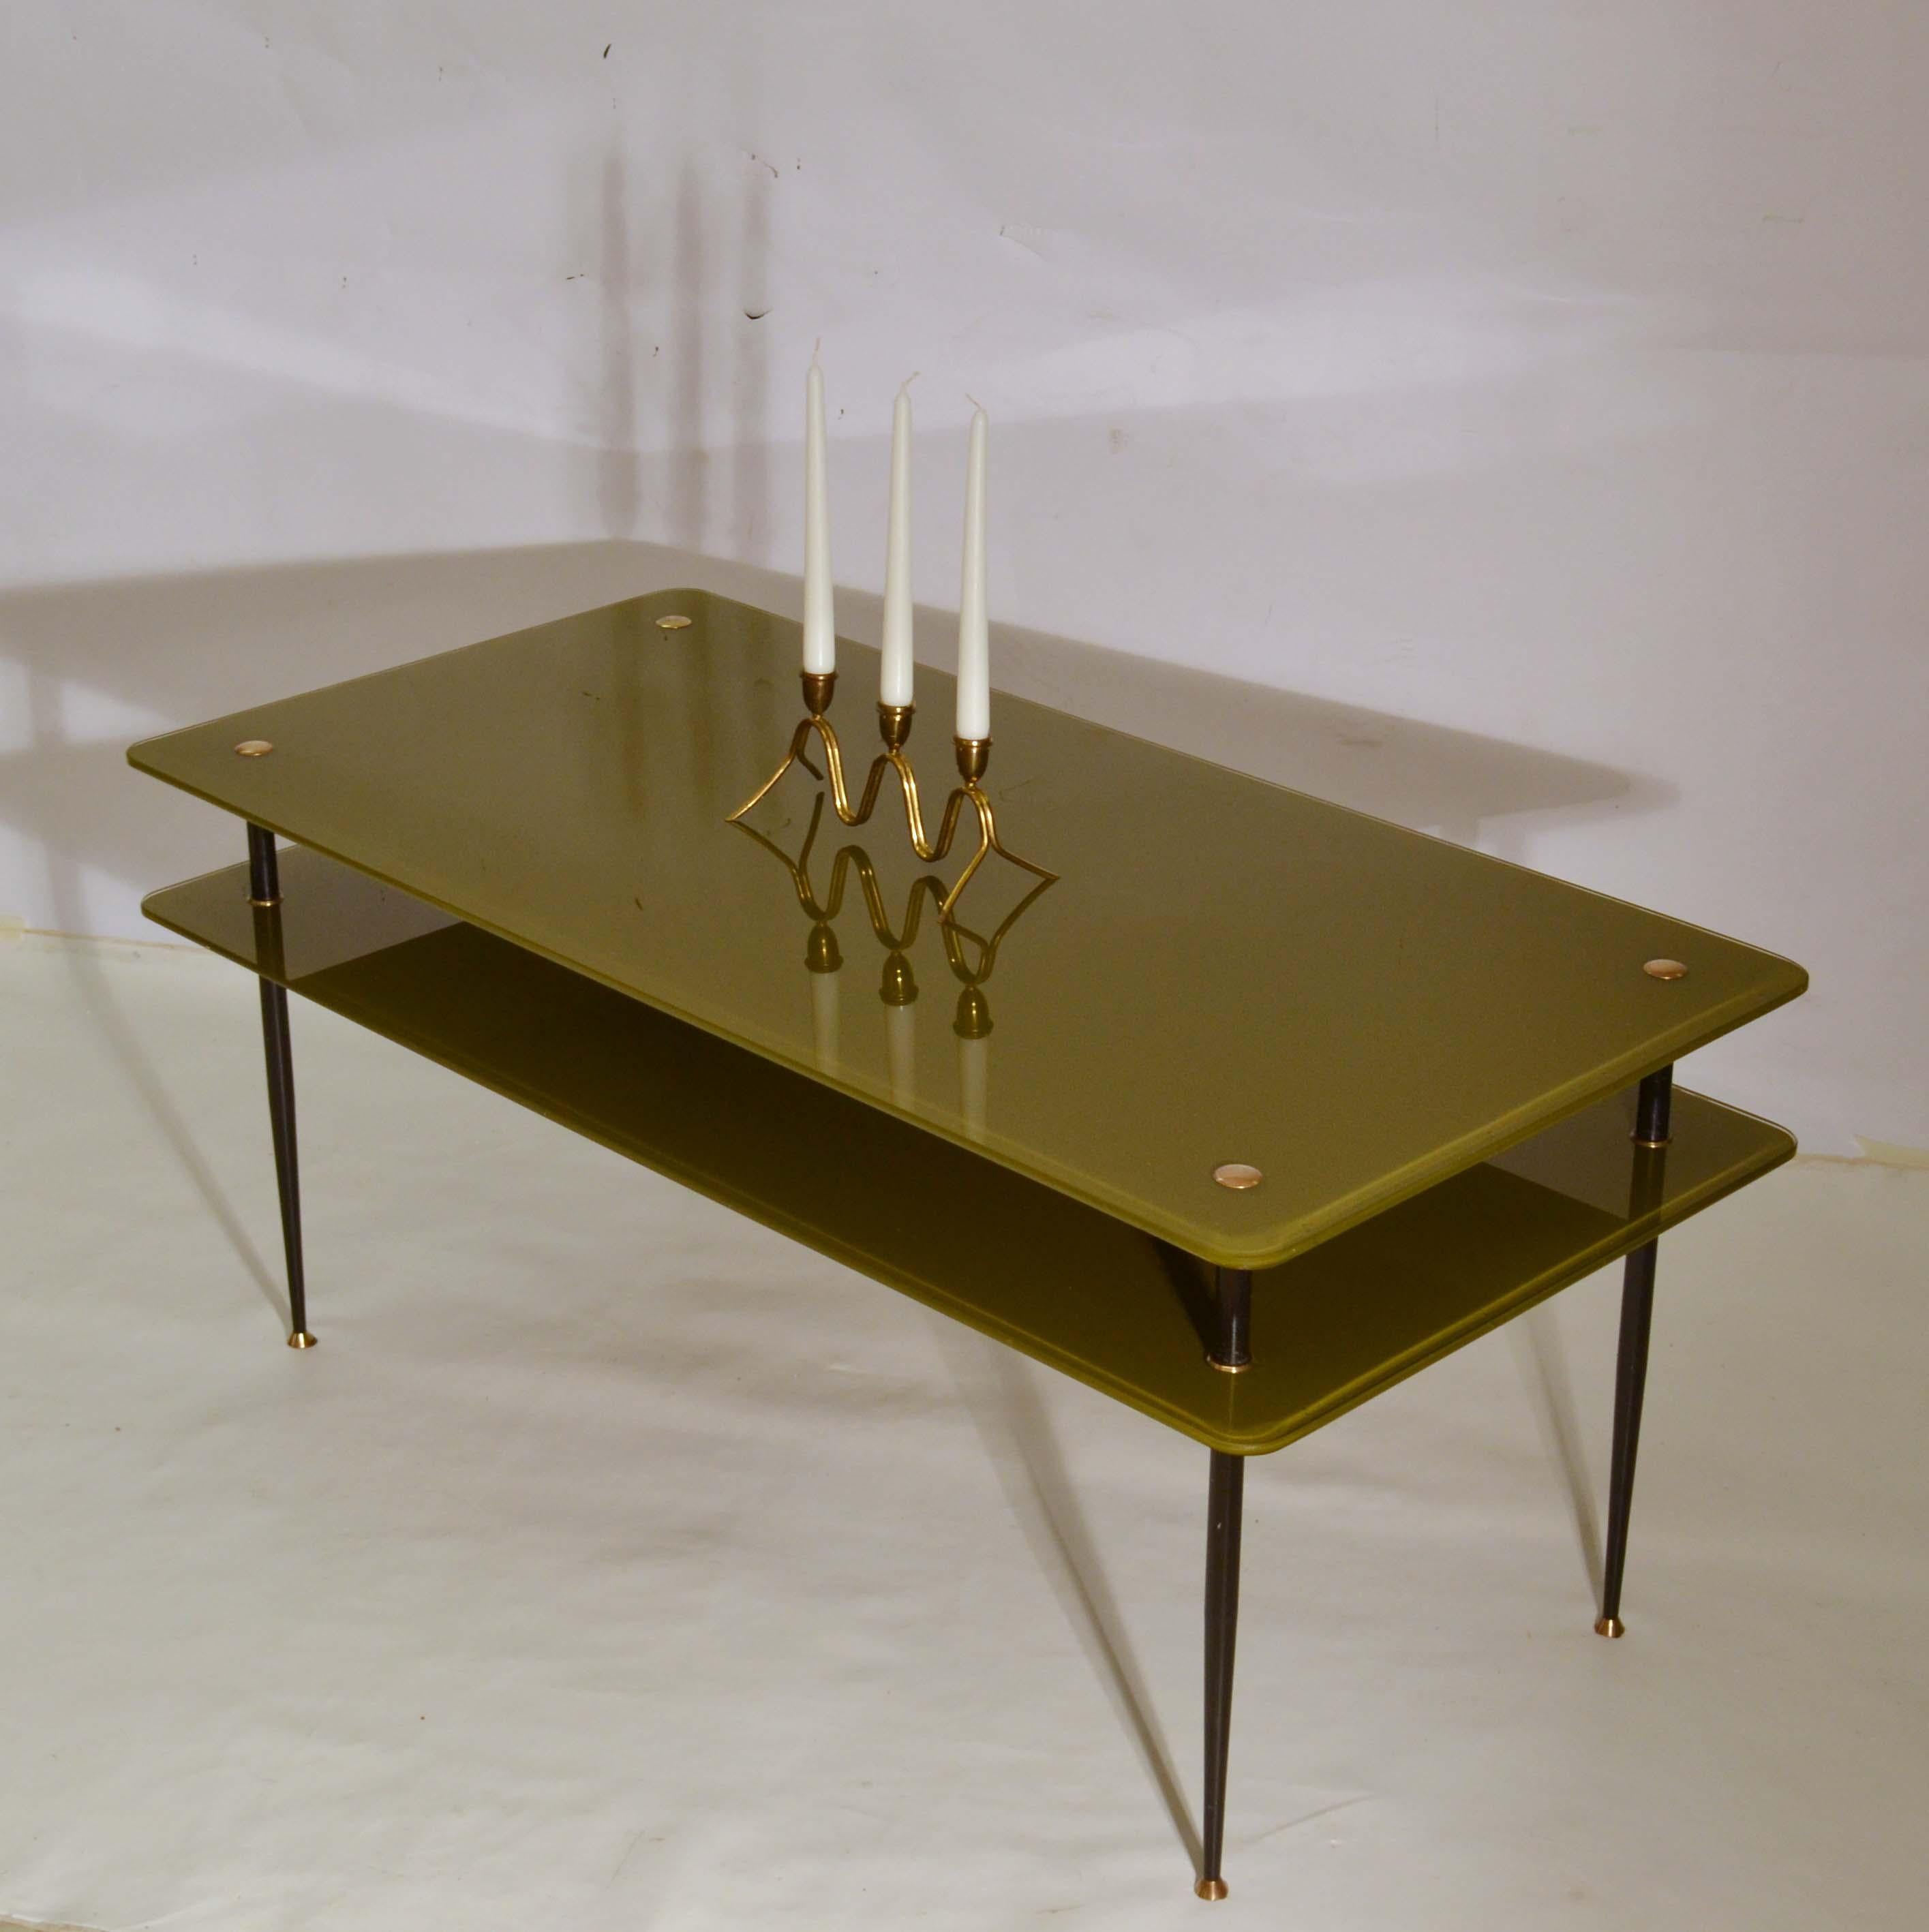 Olive Green Glass Coffee Table by Eduardo Paoli for Vitrex, Italy 1950s In Excellent Condition For Sale In London, GB